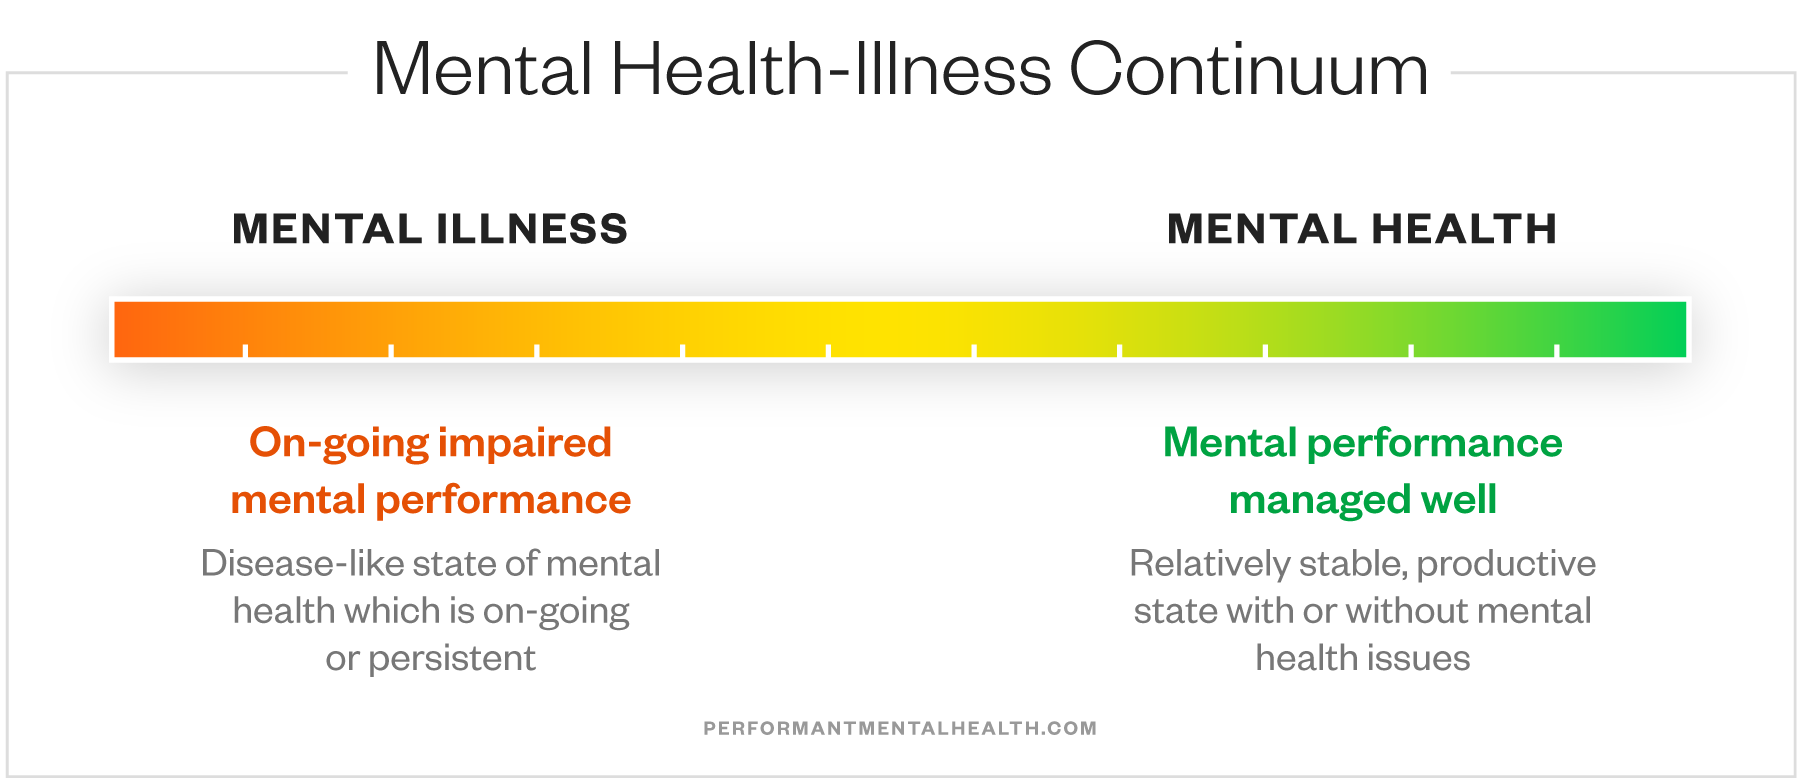 Mental Health-Illness Continuum showing maximum mental illness at left and maximum mental health at right